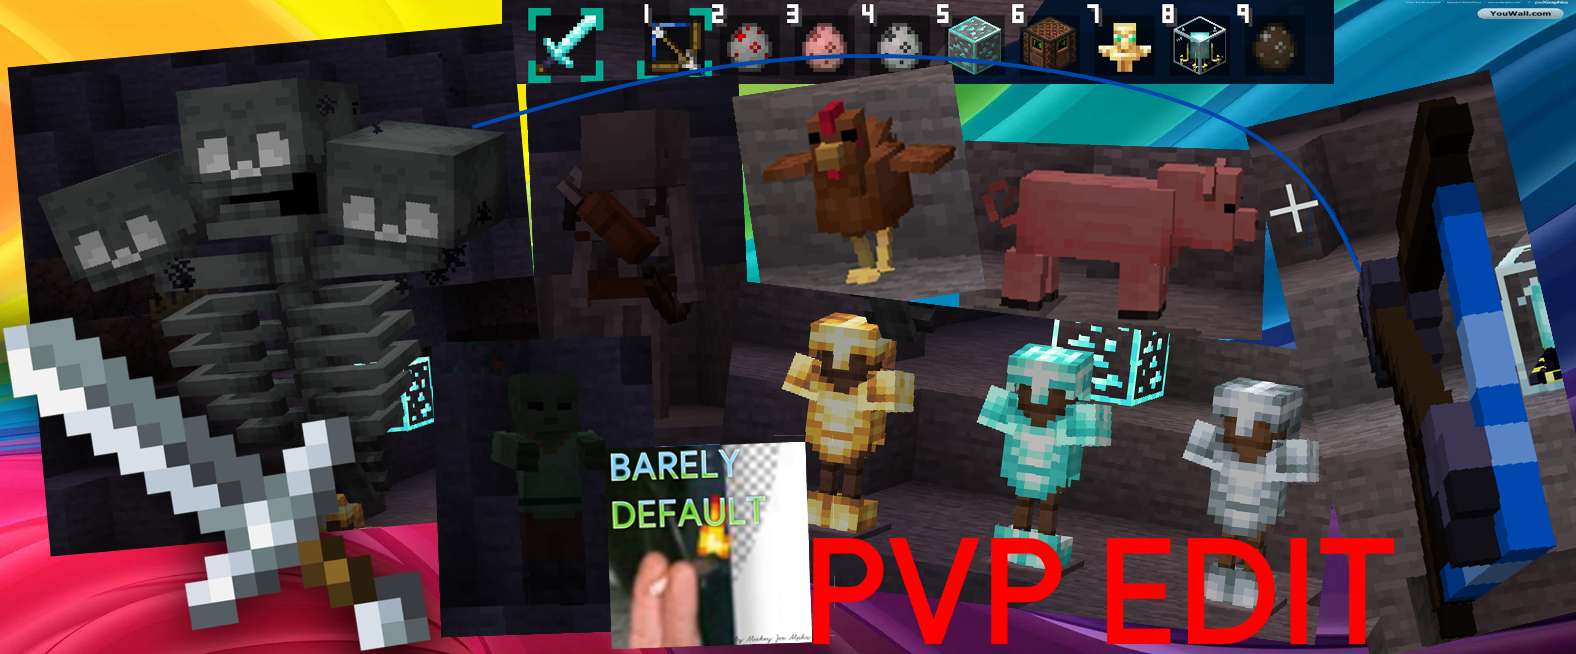 Barely Default - Official PVP Edit 16 by MickeyJoe on PvPRP